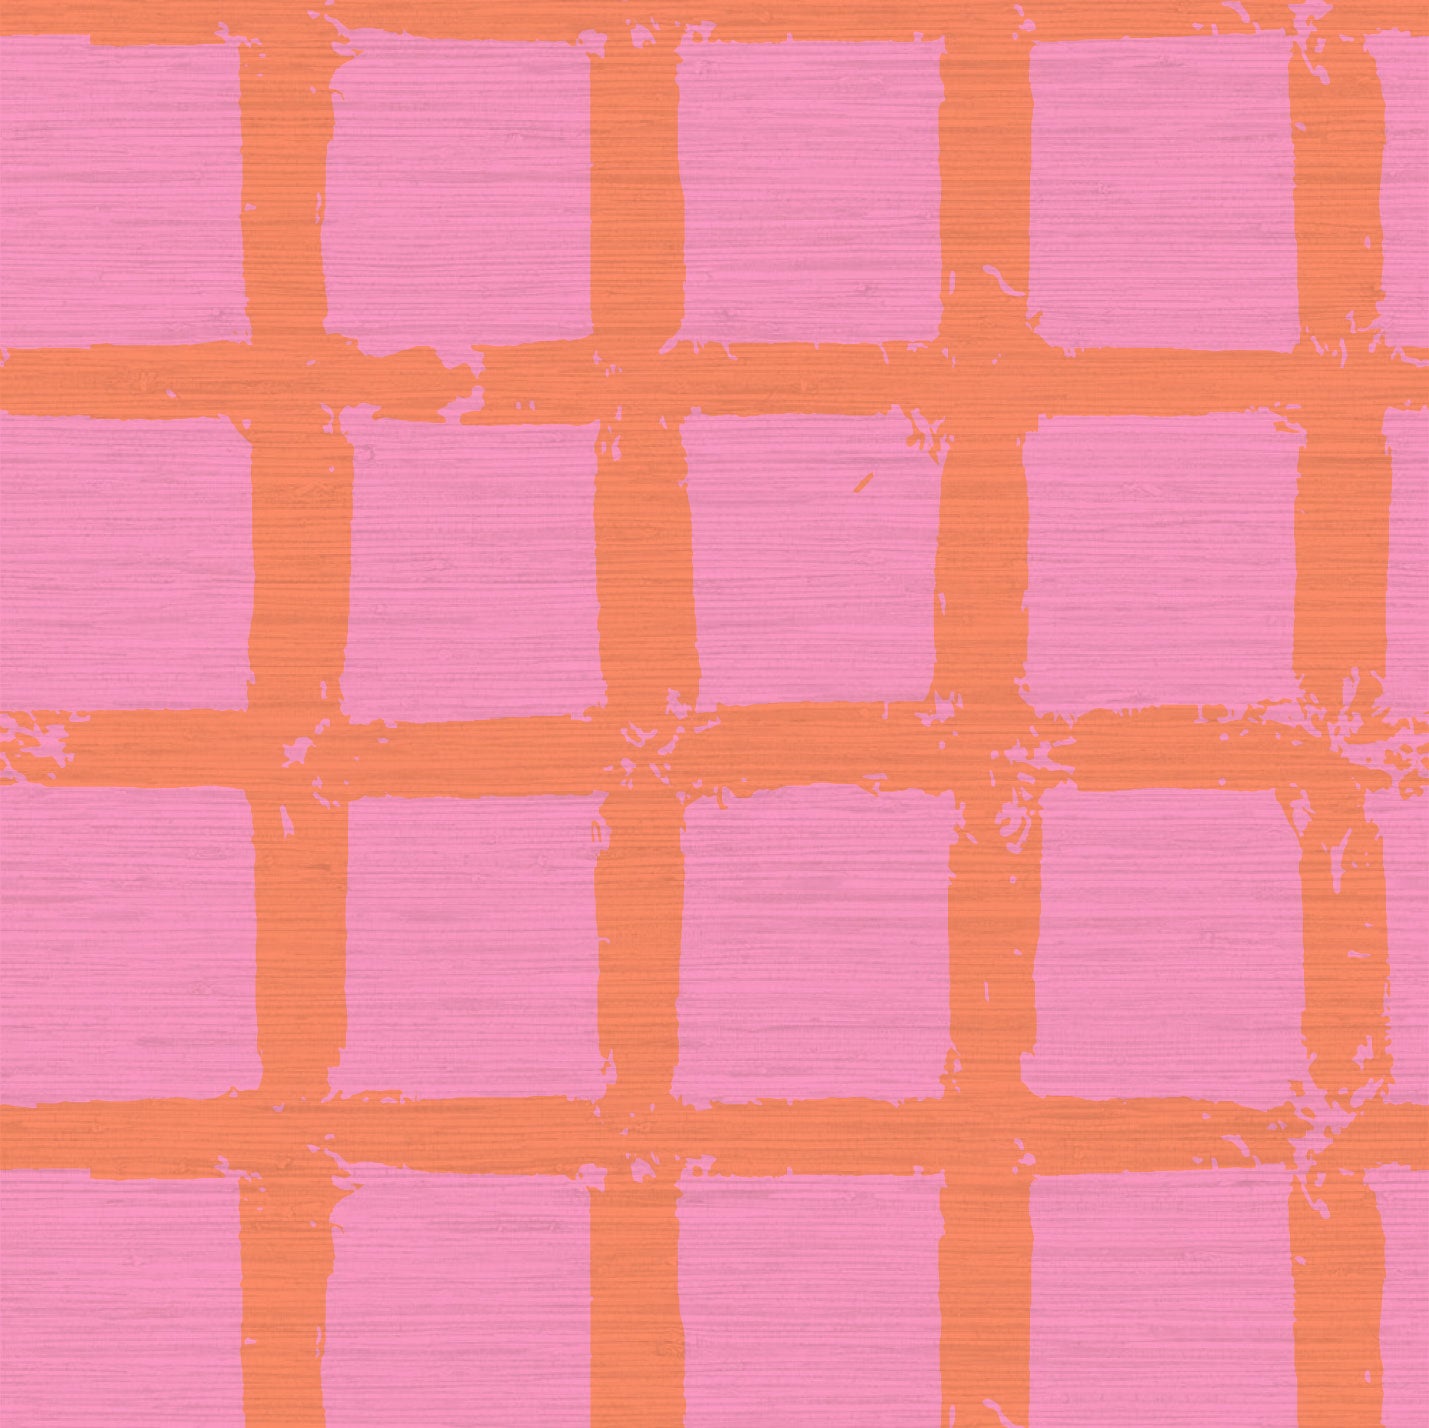 Grasscloth wallpaper in hand painted square pattern emulating window panes in an oversized plaid layout with a pastel pink base and dark orange print